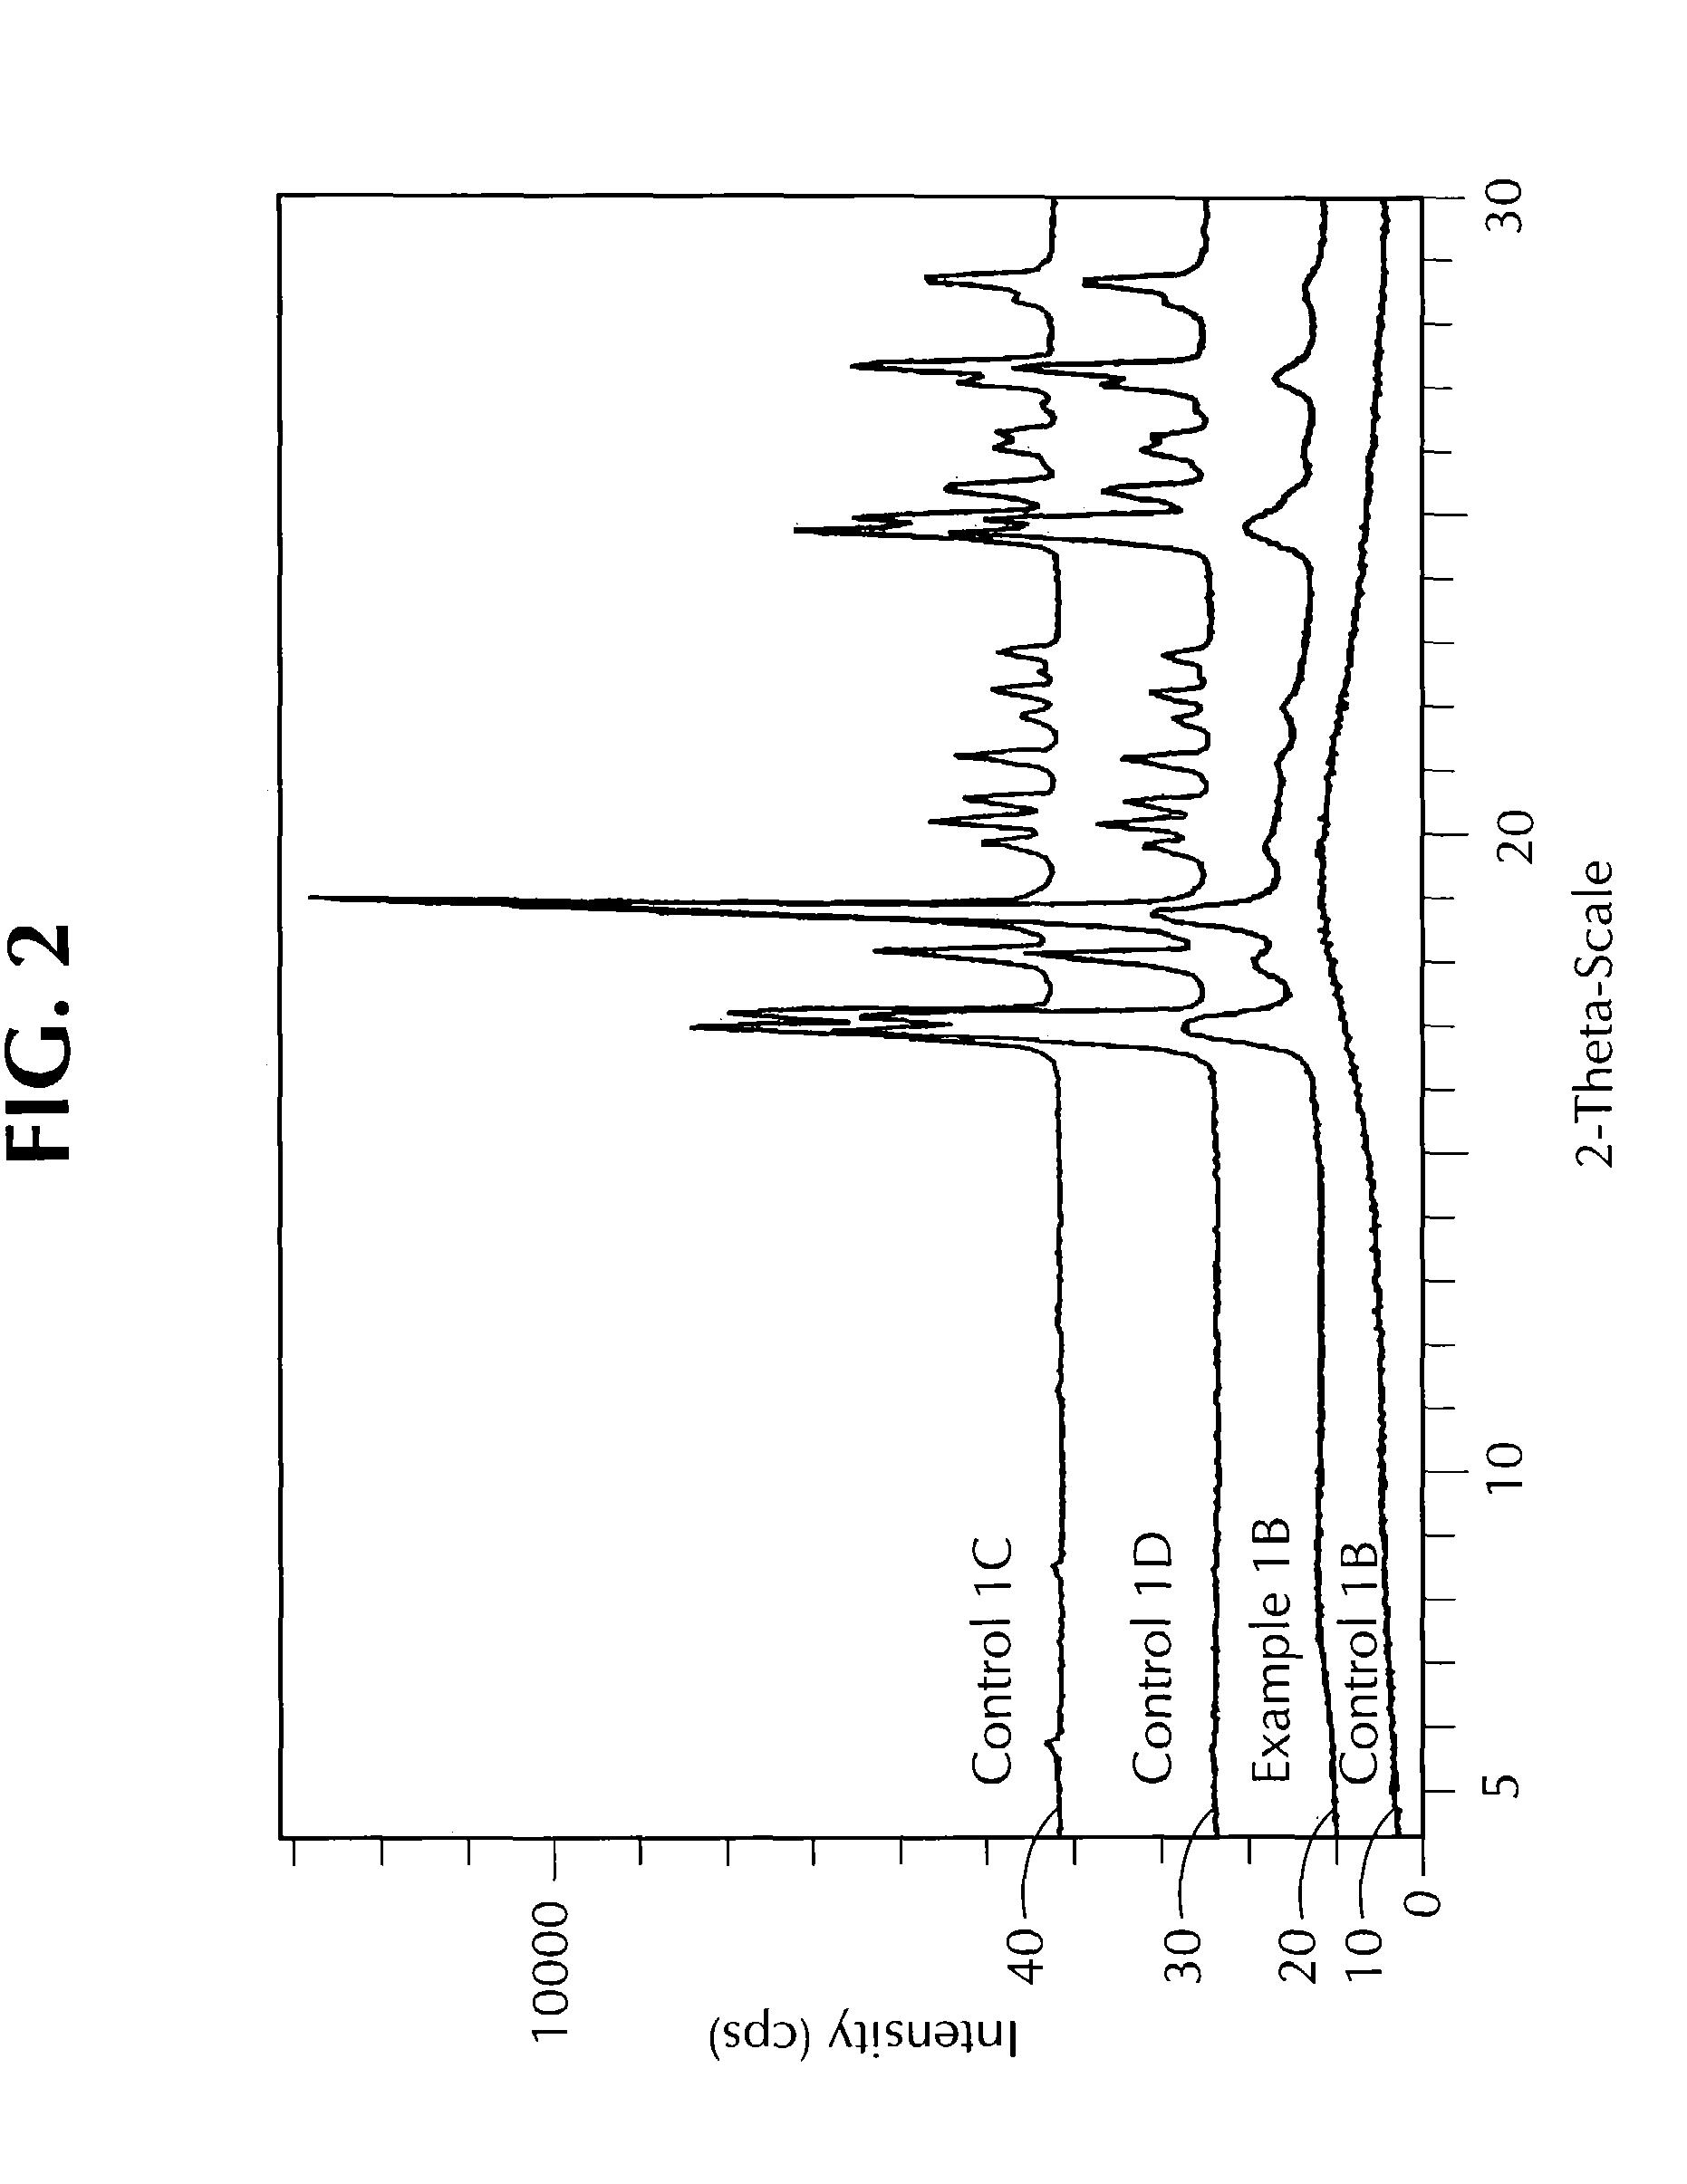 Pharmaceutical compositions of semi-ordered drugs and polymers